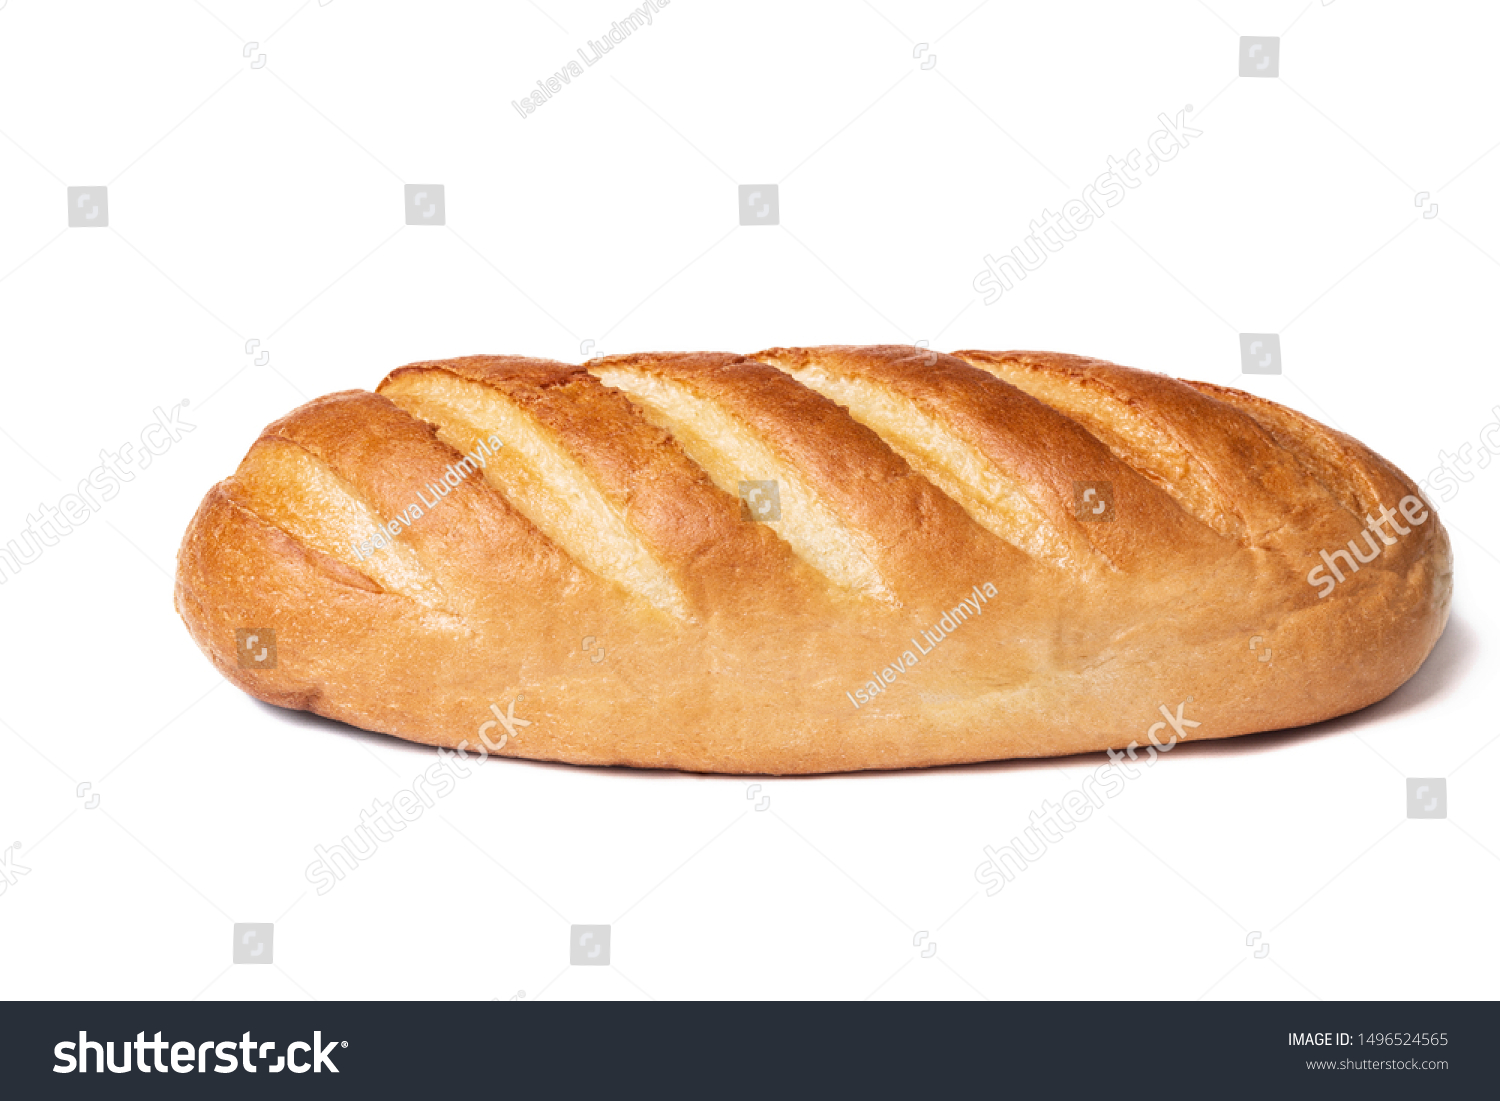 Loaf of bread isolated on white background. Whole bread.Horizontal frame.Studio.  #1496524565